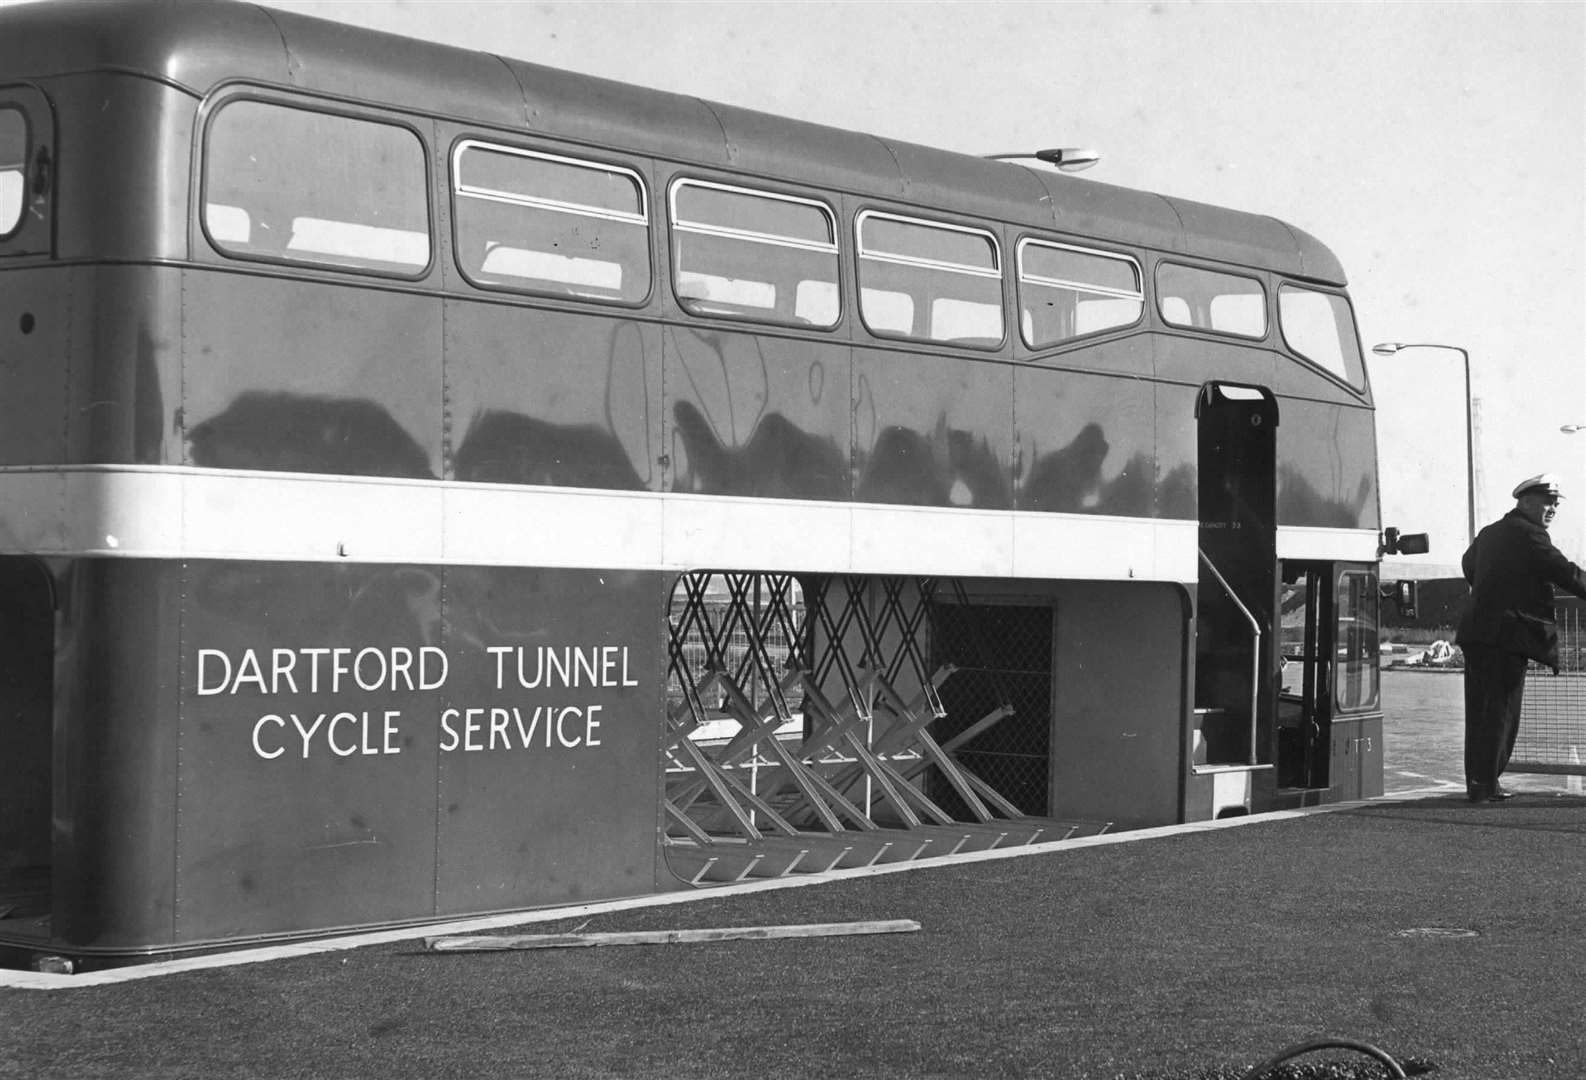 The short-lived cycle bus service at the Dartford Tunnel on November 15 1967. Photo: Archive